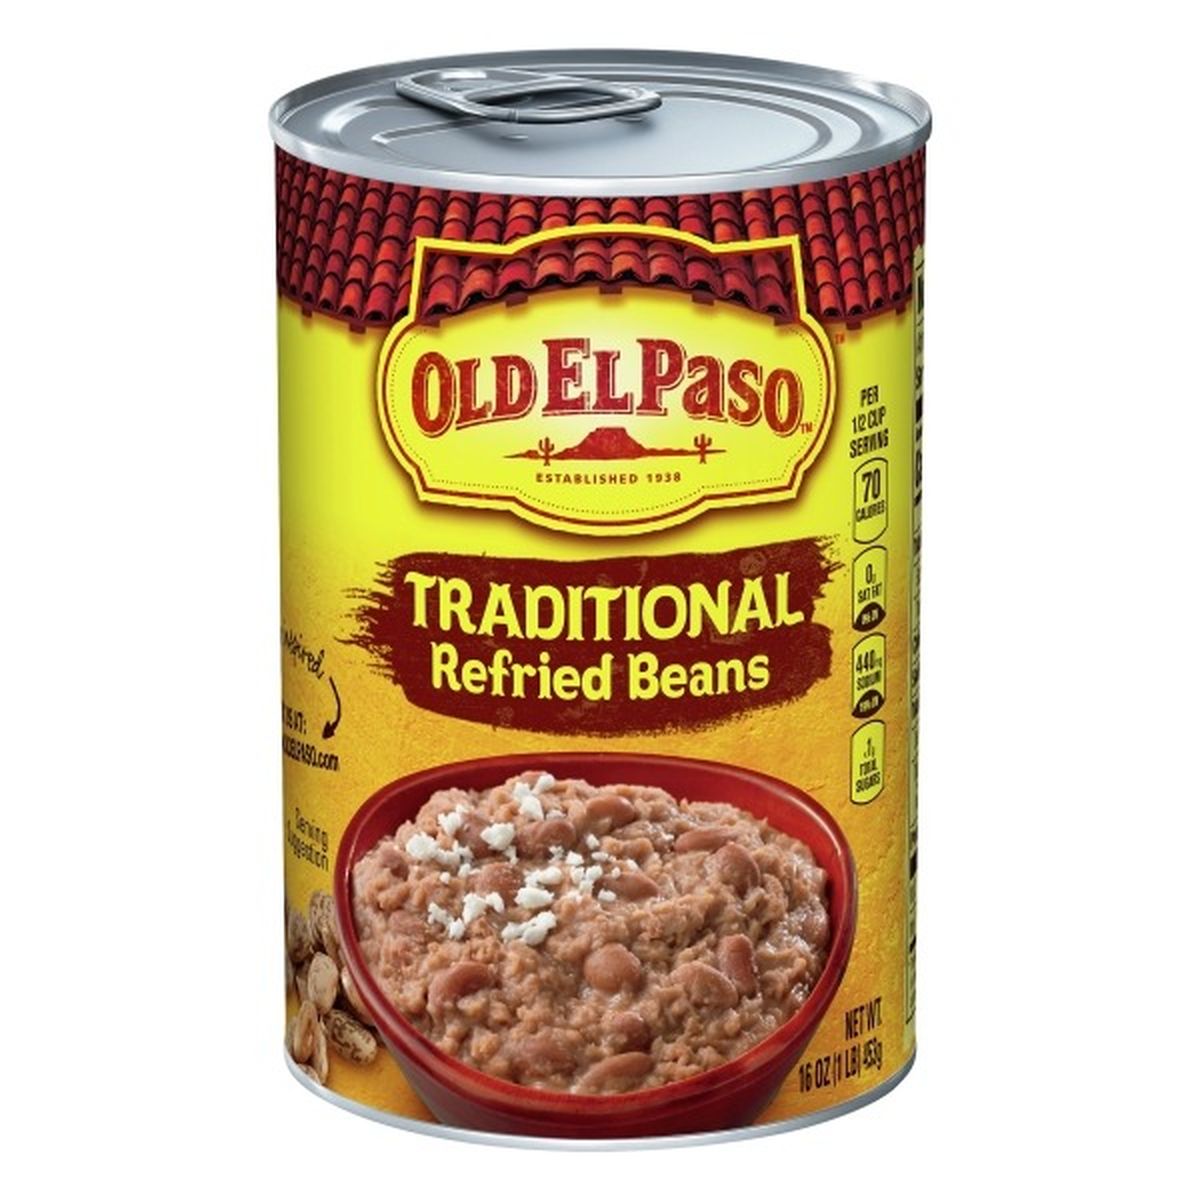 Calories in Old El Paso Refried Beans, Traditional